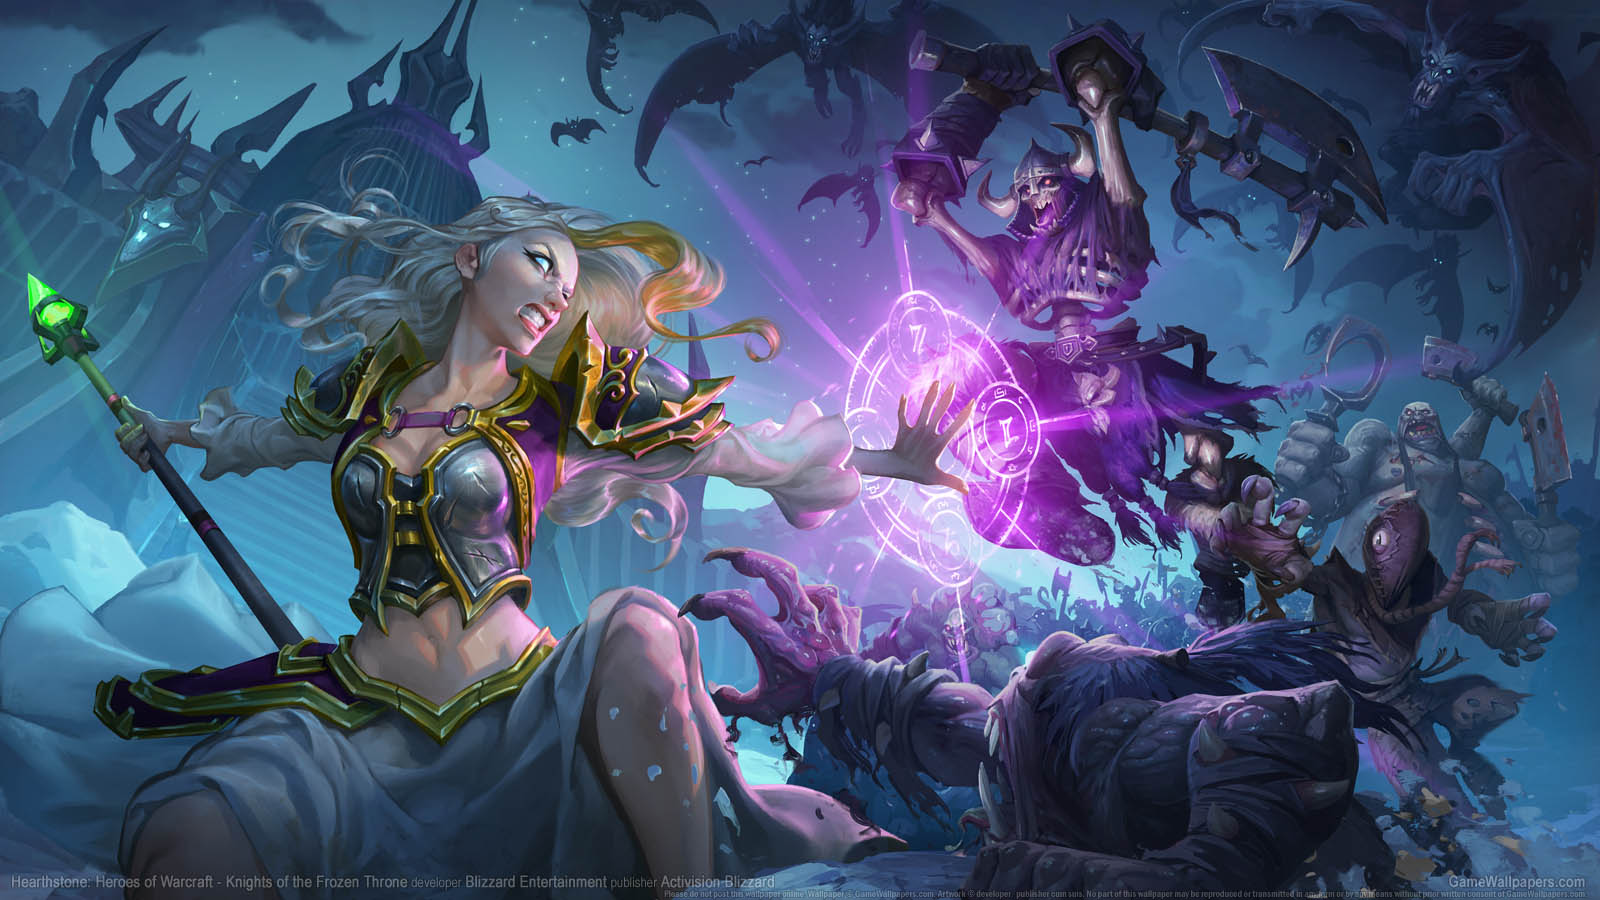 Hearthstone: Heroes of Warcraft - Knights of the Frozen Throne wallpaper 01 1600x900